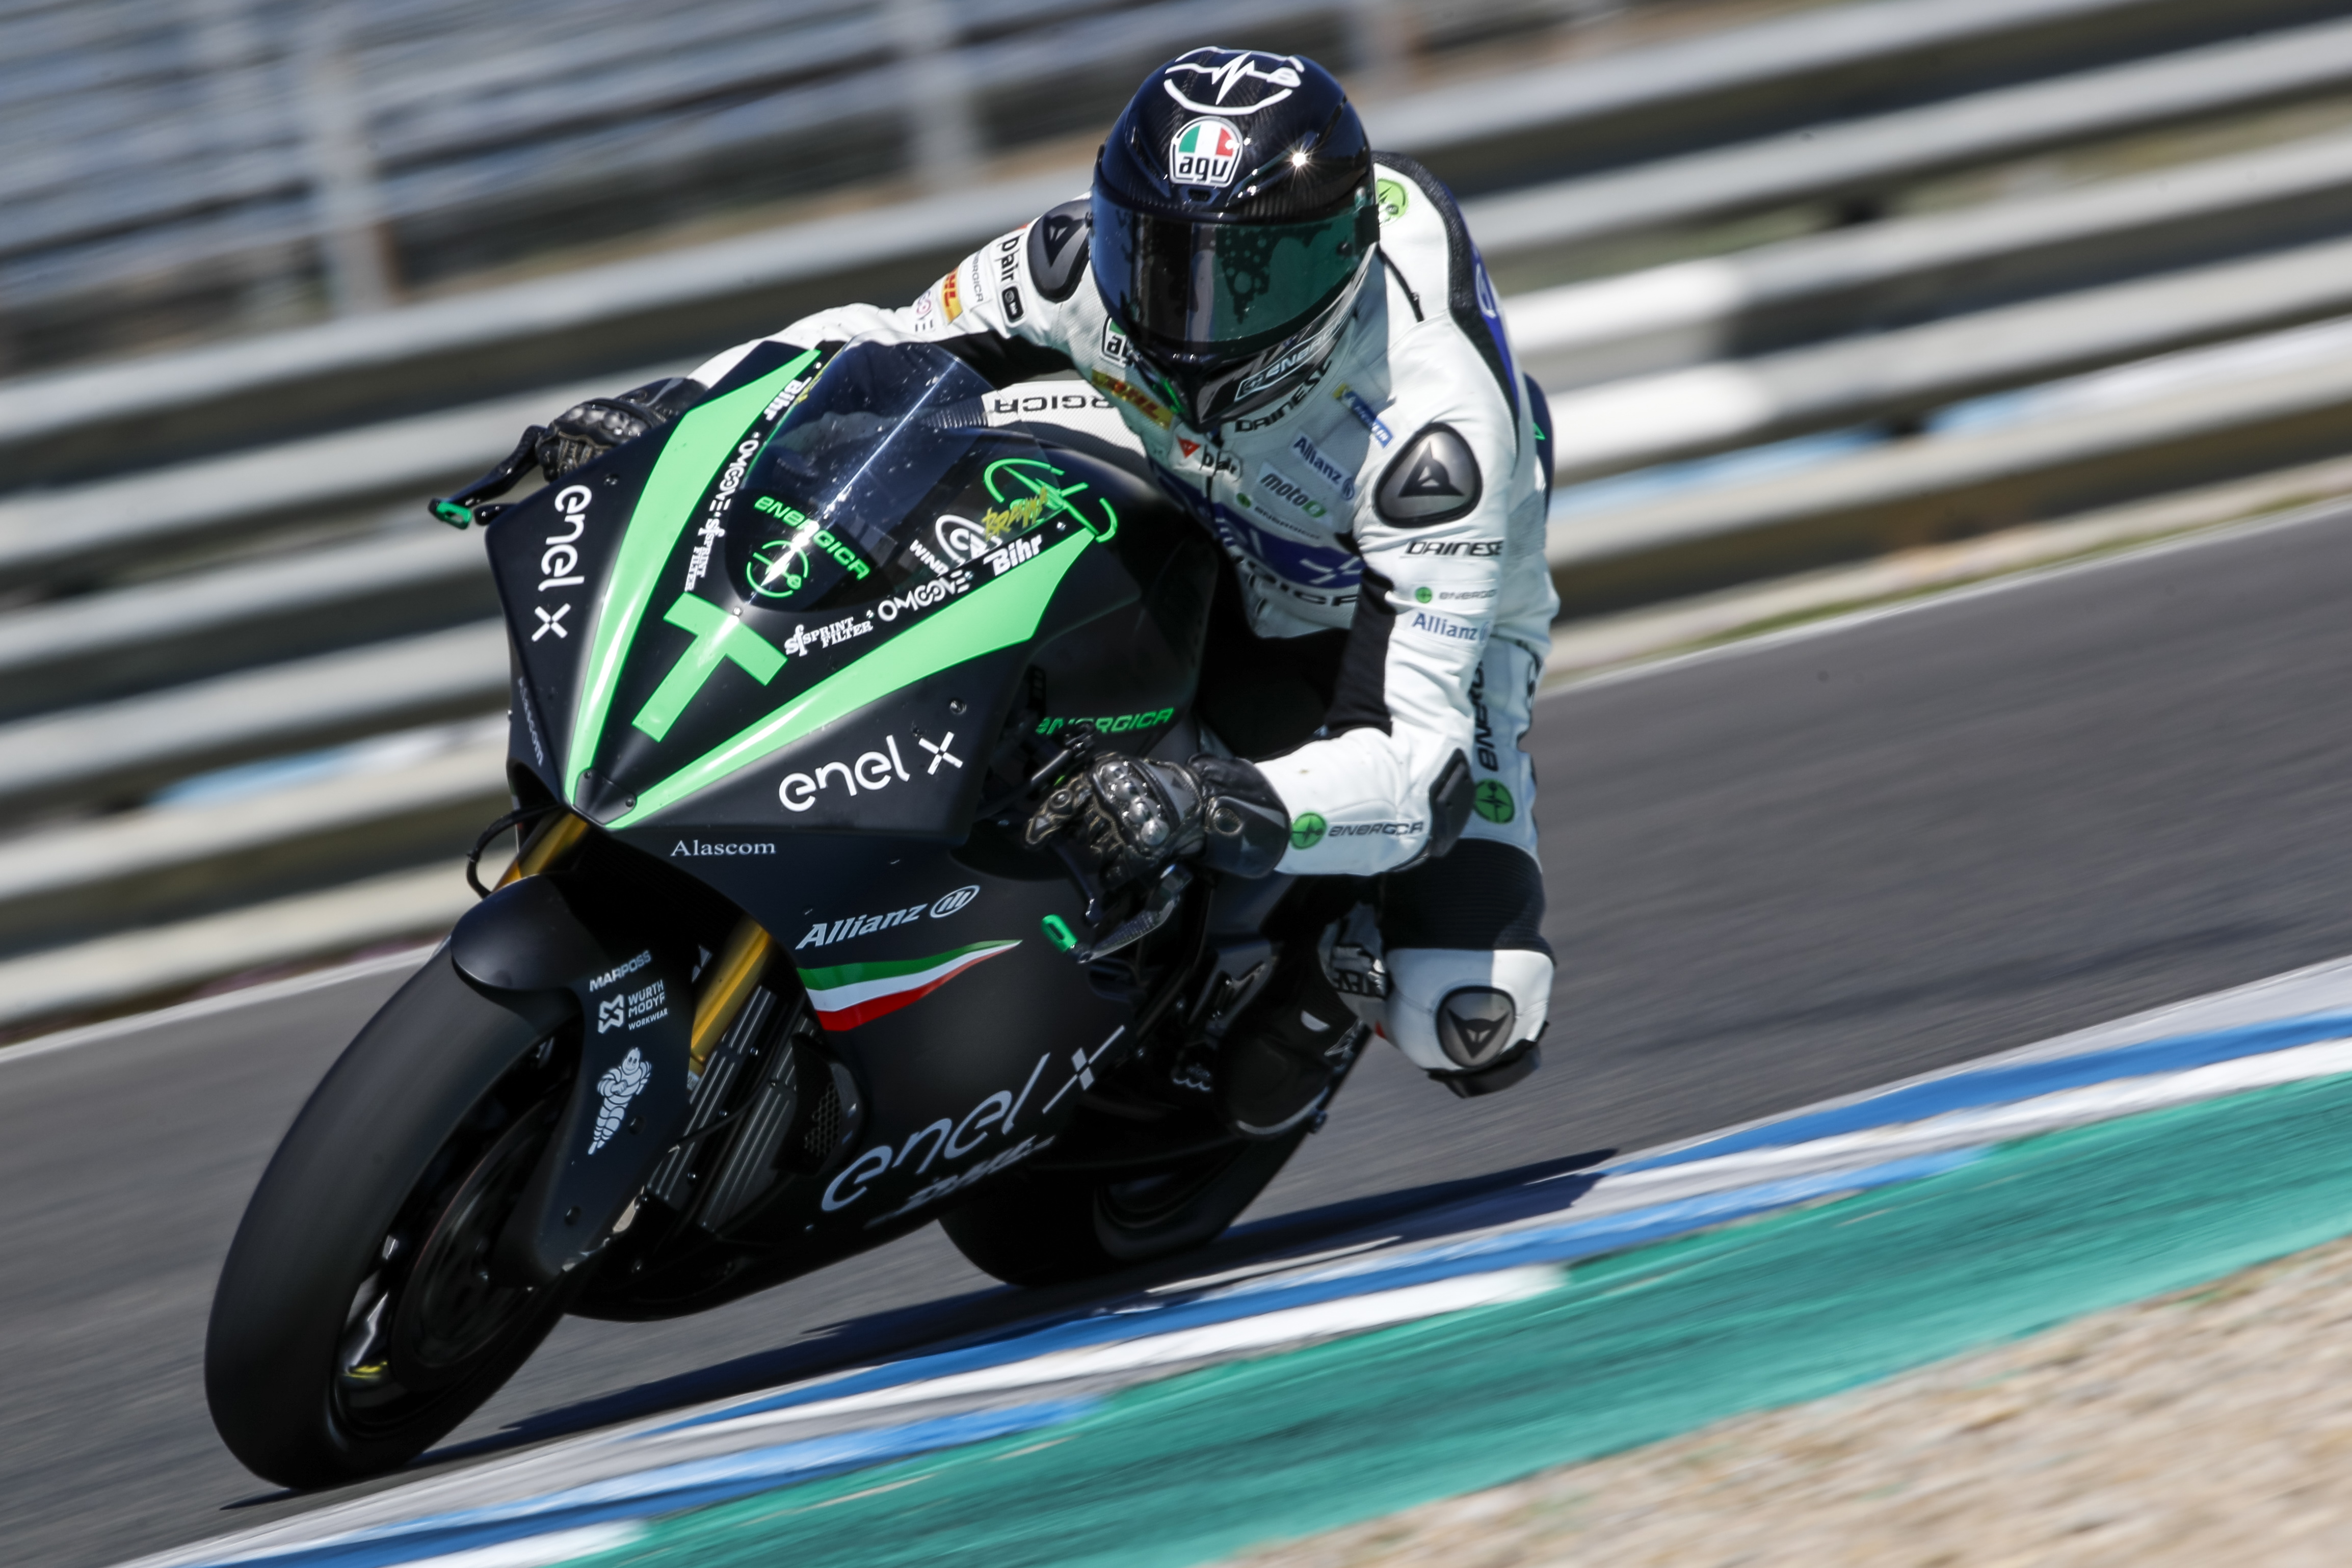 Test ride of the Energica Ego Corsa. Photo via CRP Technology